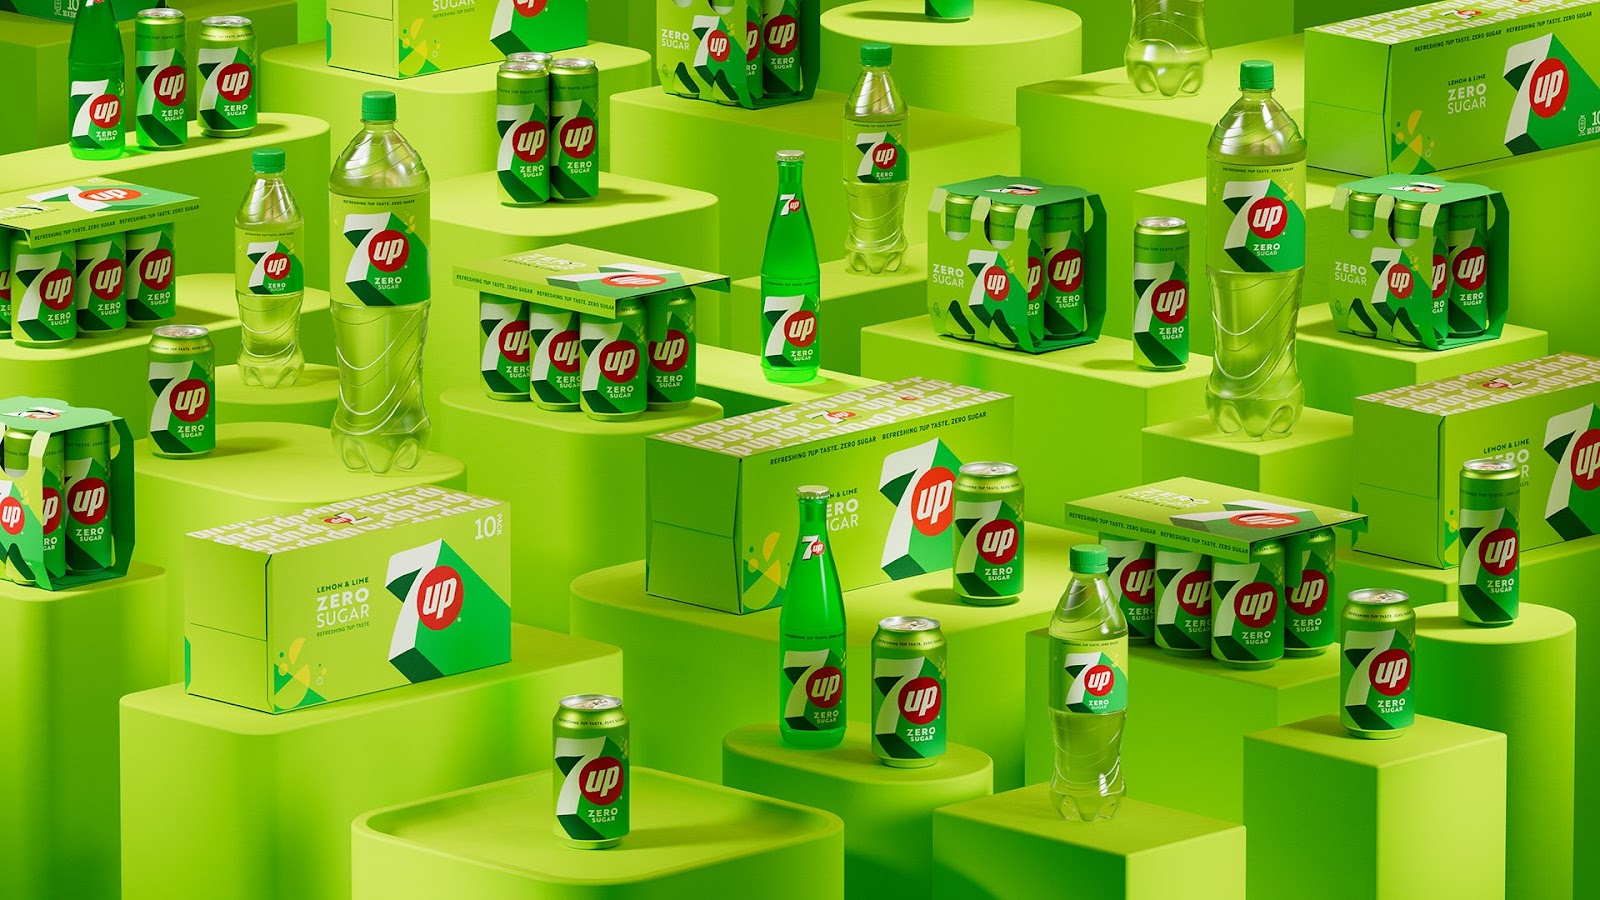 Image shows a selection of 7UP zero sugar products featuring the new design identity, which are stacked on green boxes